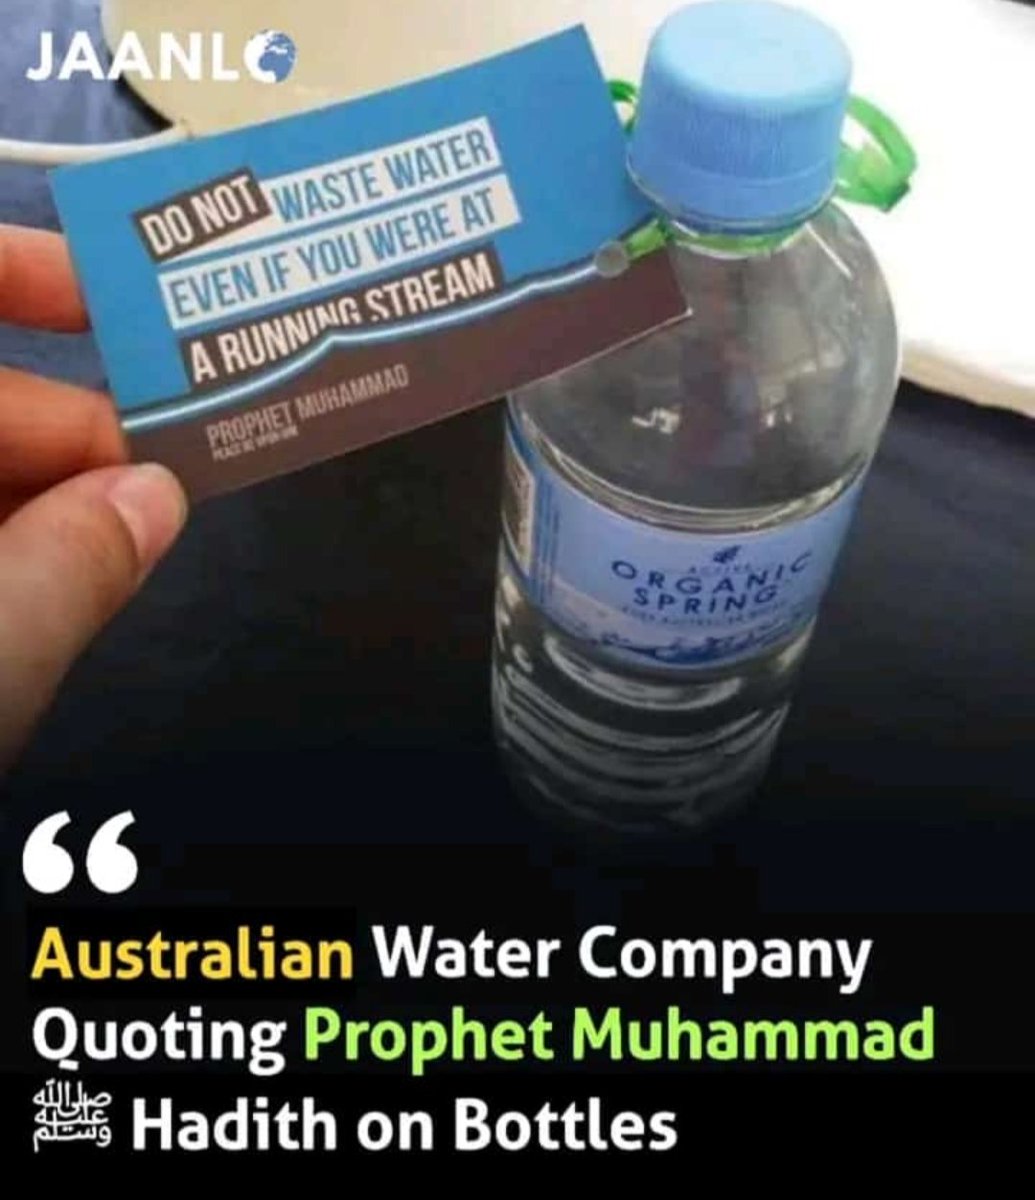 ”Do not waste water even if you were at a running stream.”

– Prophet Muhammad (peace be upon him)
[Sunan Ibn Majah 425]